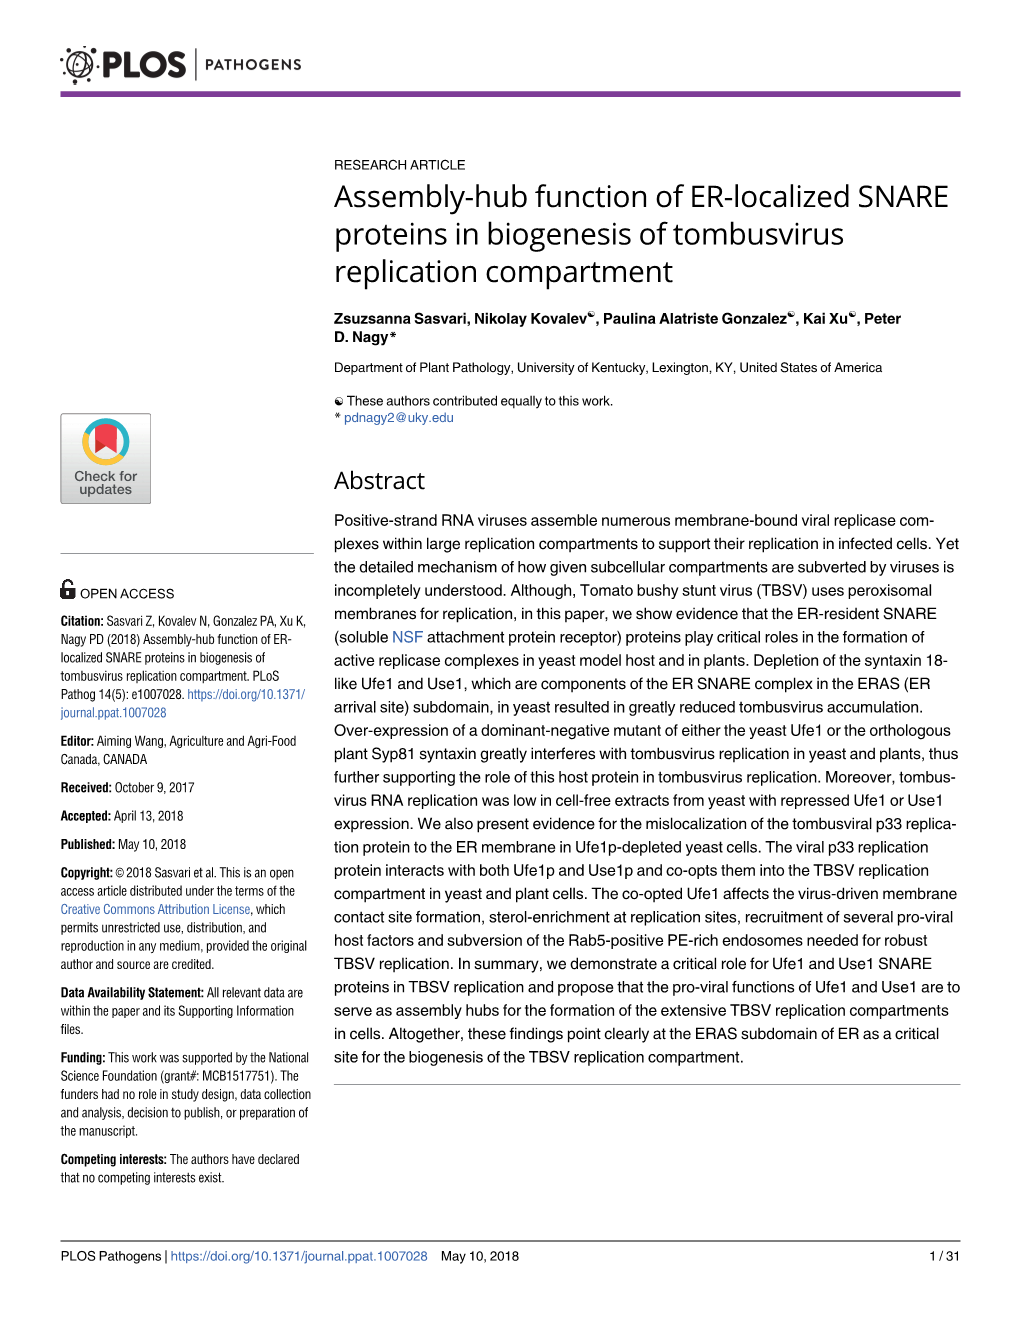 Assembly-Hub Function of ER-Localized SNARE Proteins in Biogenesis of Tombusvirus Replication Compartment